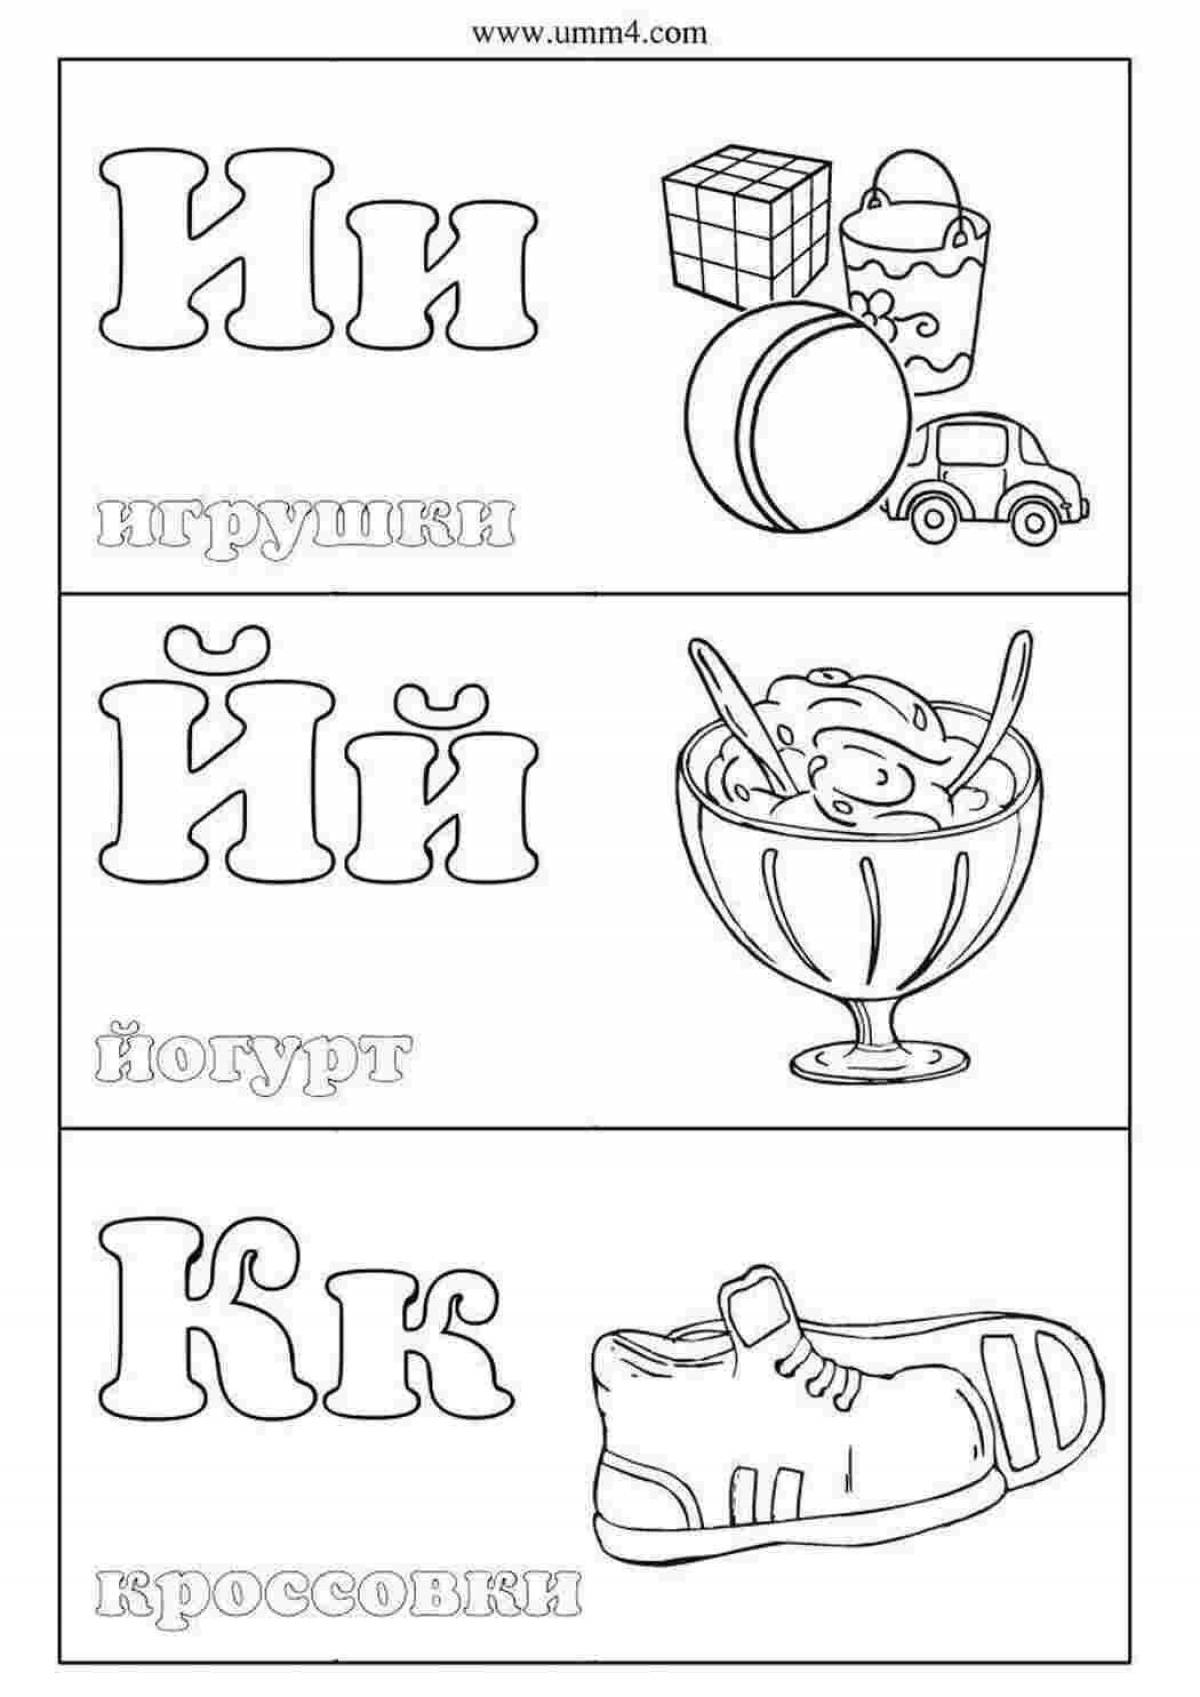 Colour coloring of the alphabet